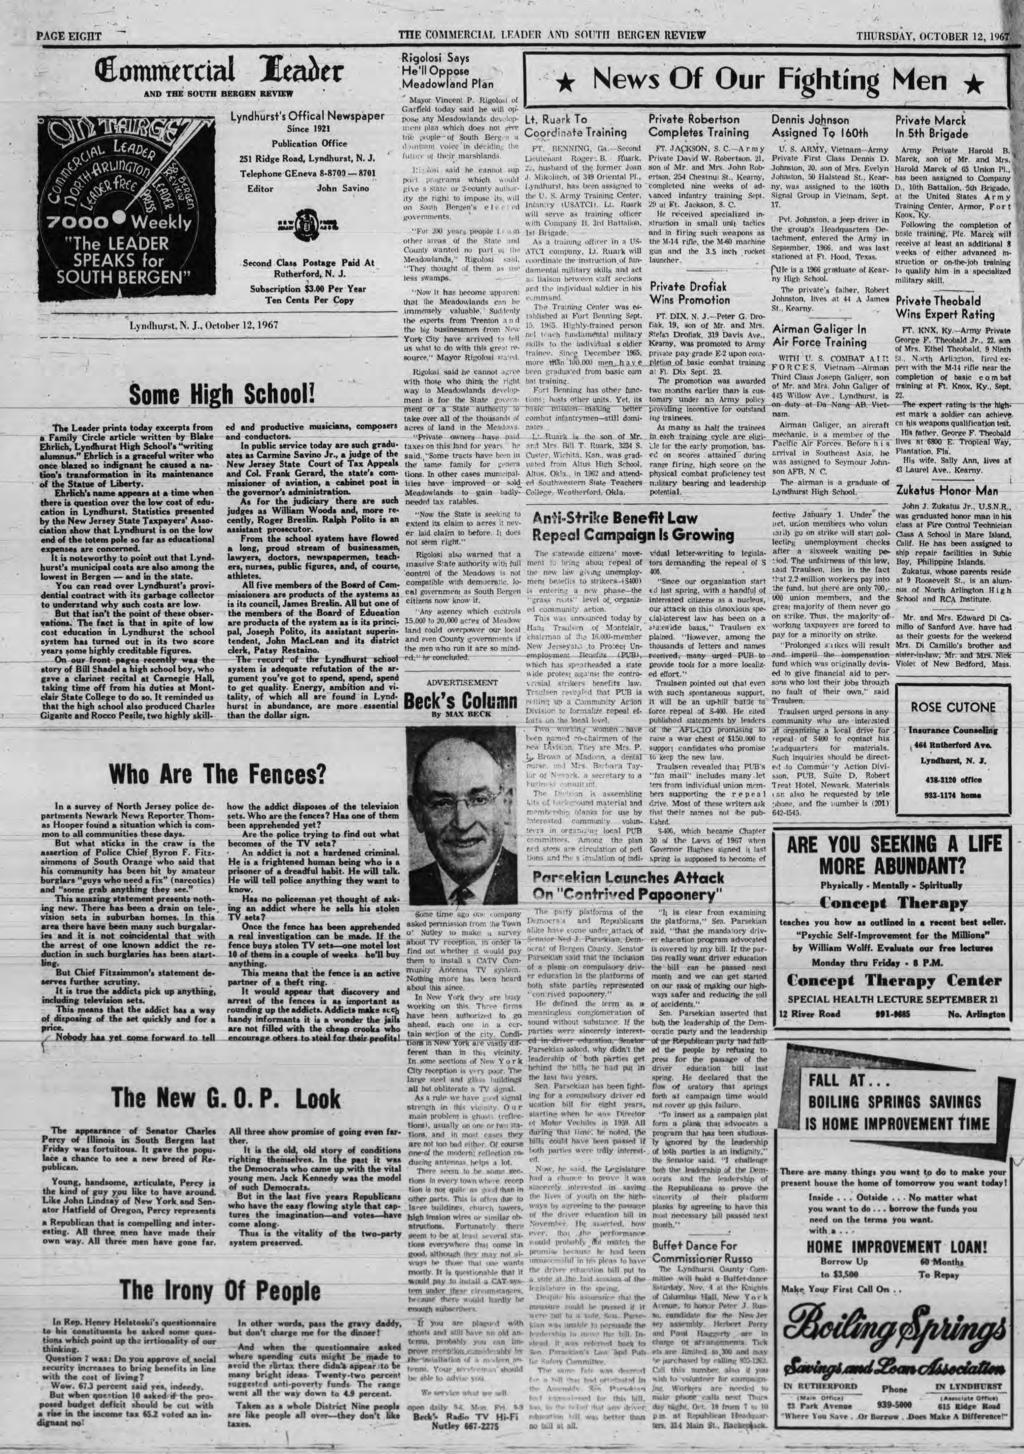 PAGE EIGDT TTIE COMMERCIAL LEADER AN1) SOUTH BERGEN REVIEW THURSDAY, OCTOBER 12, 1967 Commercial leader AND THE SOUTH BERGEN REVIEW i\% W 7 0 0 0 * W eekly "The LEADER \ SPEAKS for / SOUTH BERGEN